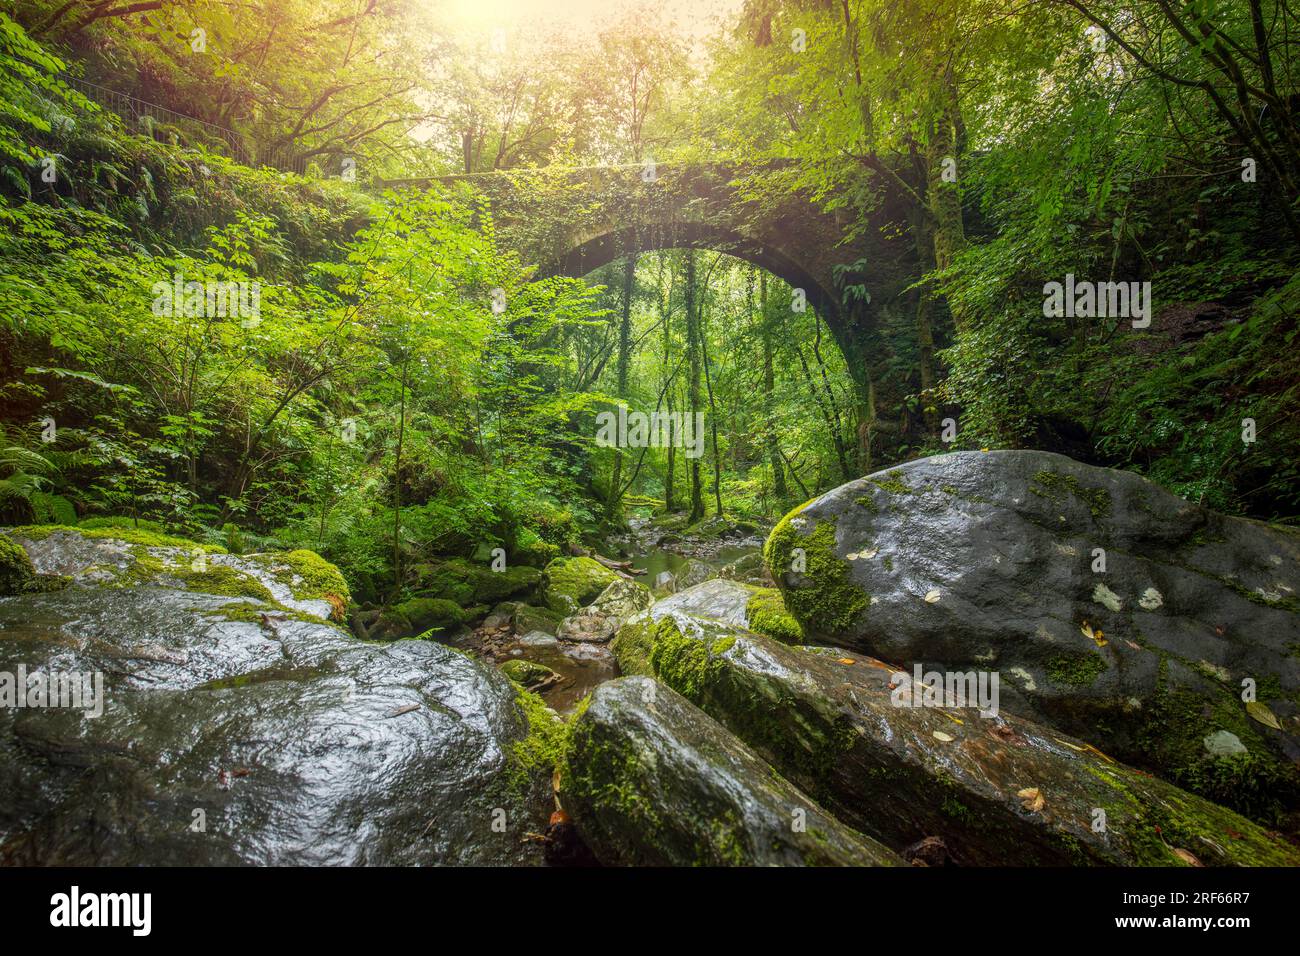 Old bridge over the Sesn river in the Fragas do Eume natural park in A Corua, Galicia, Spain with exuberant vegetation Stock Photo